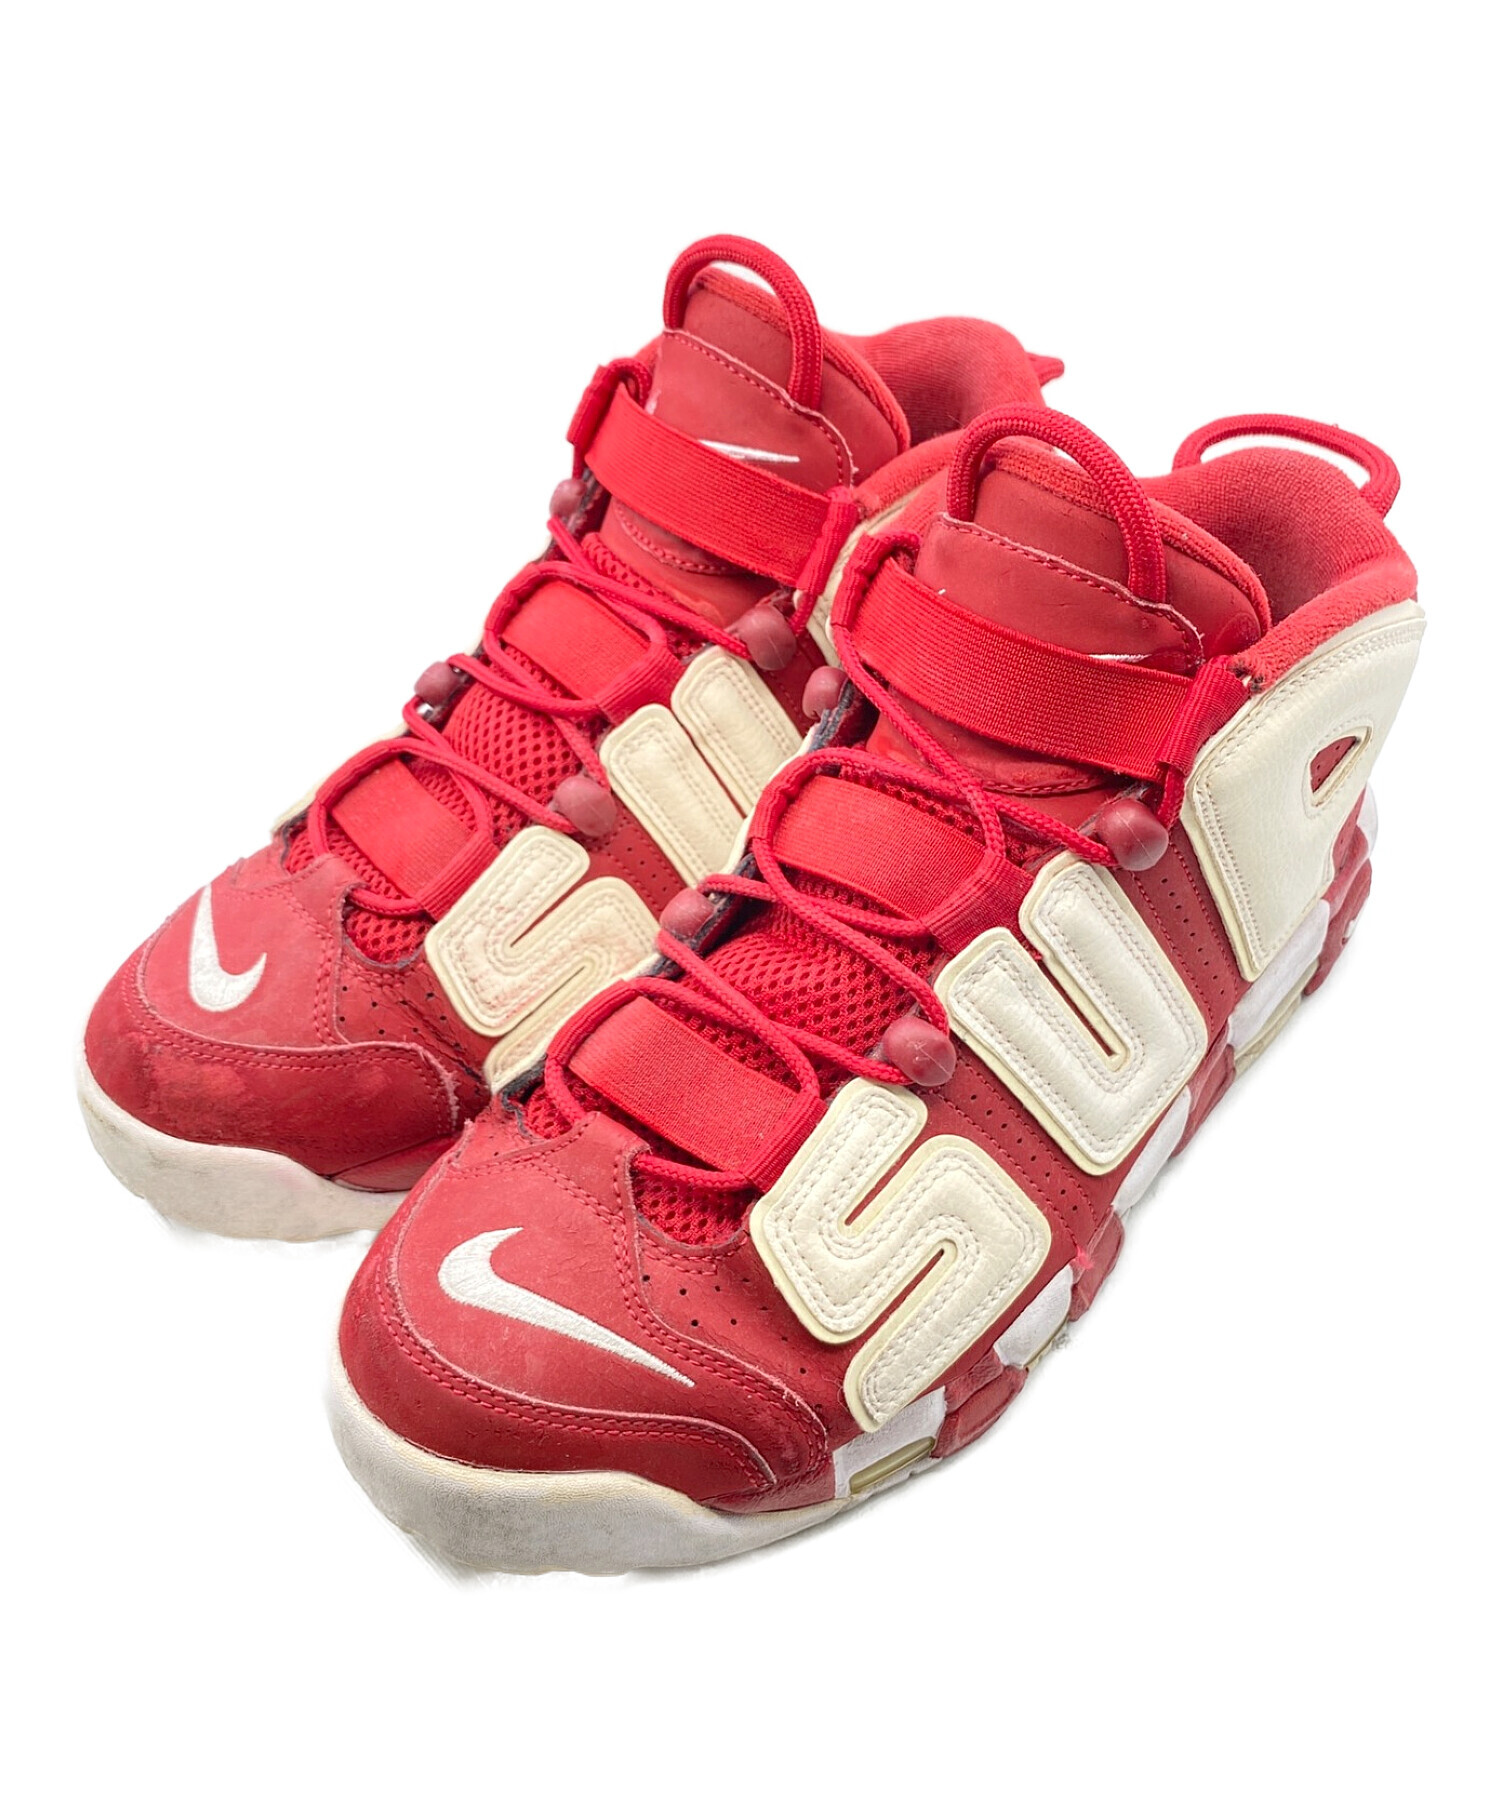 【27.5】Nike Supreme Air More Uptempo red